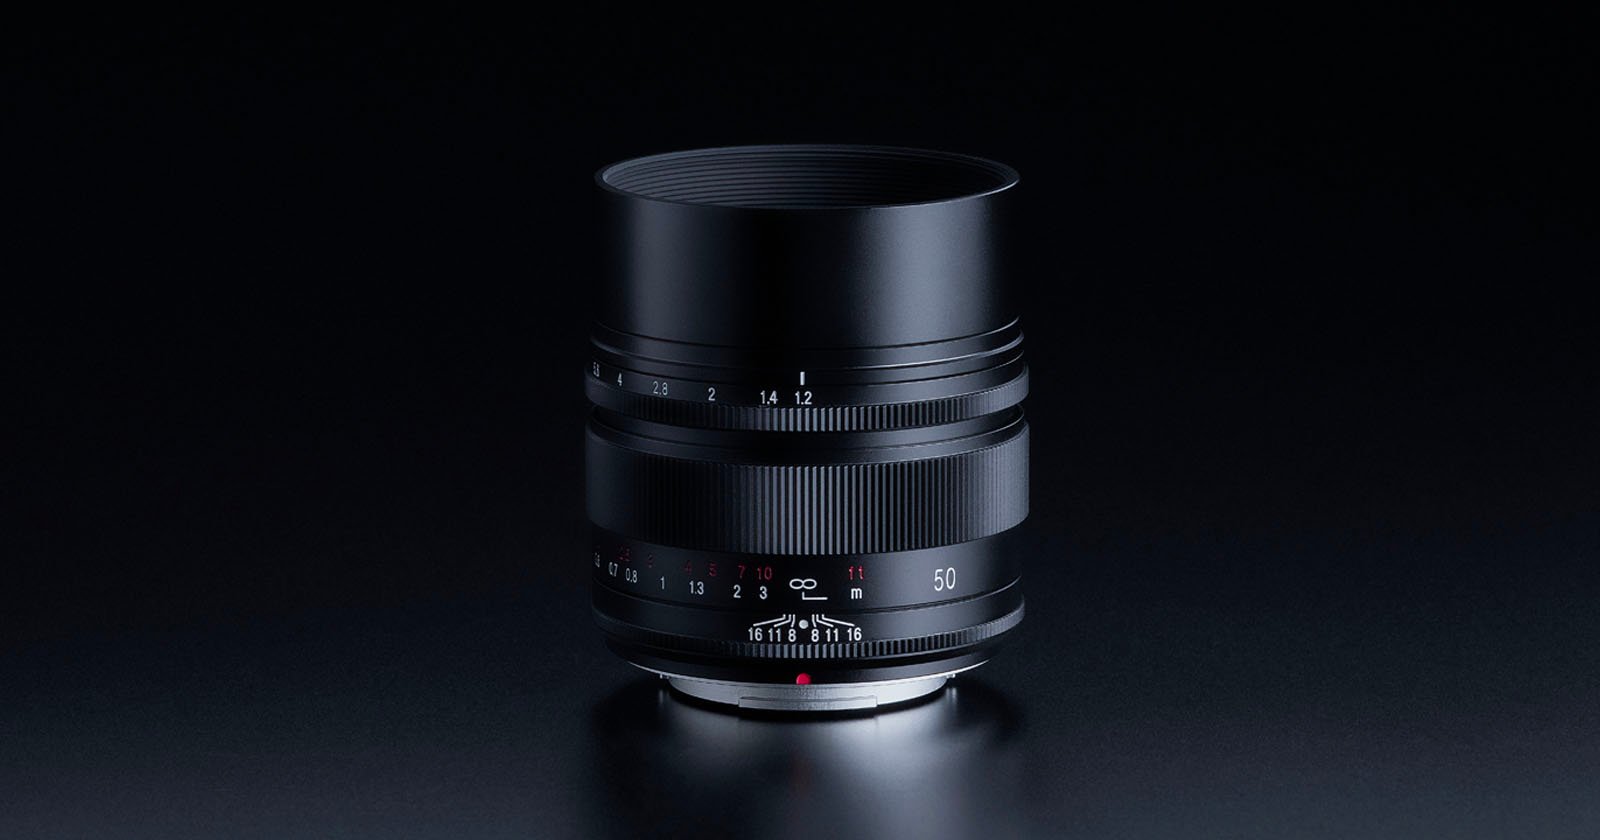 The New Voigtlander Nokton 50mm f/1.2 is Made Just for Fuji X-Mount